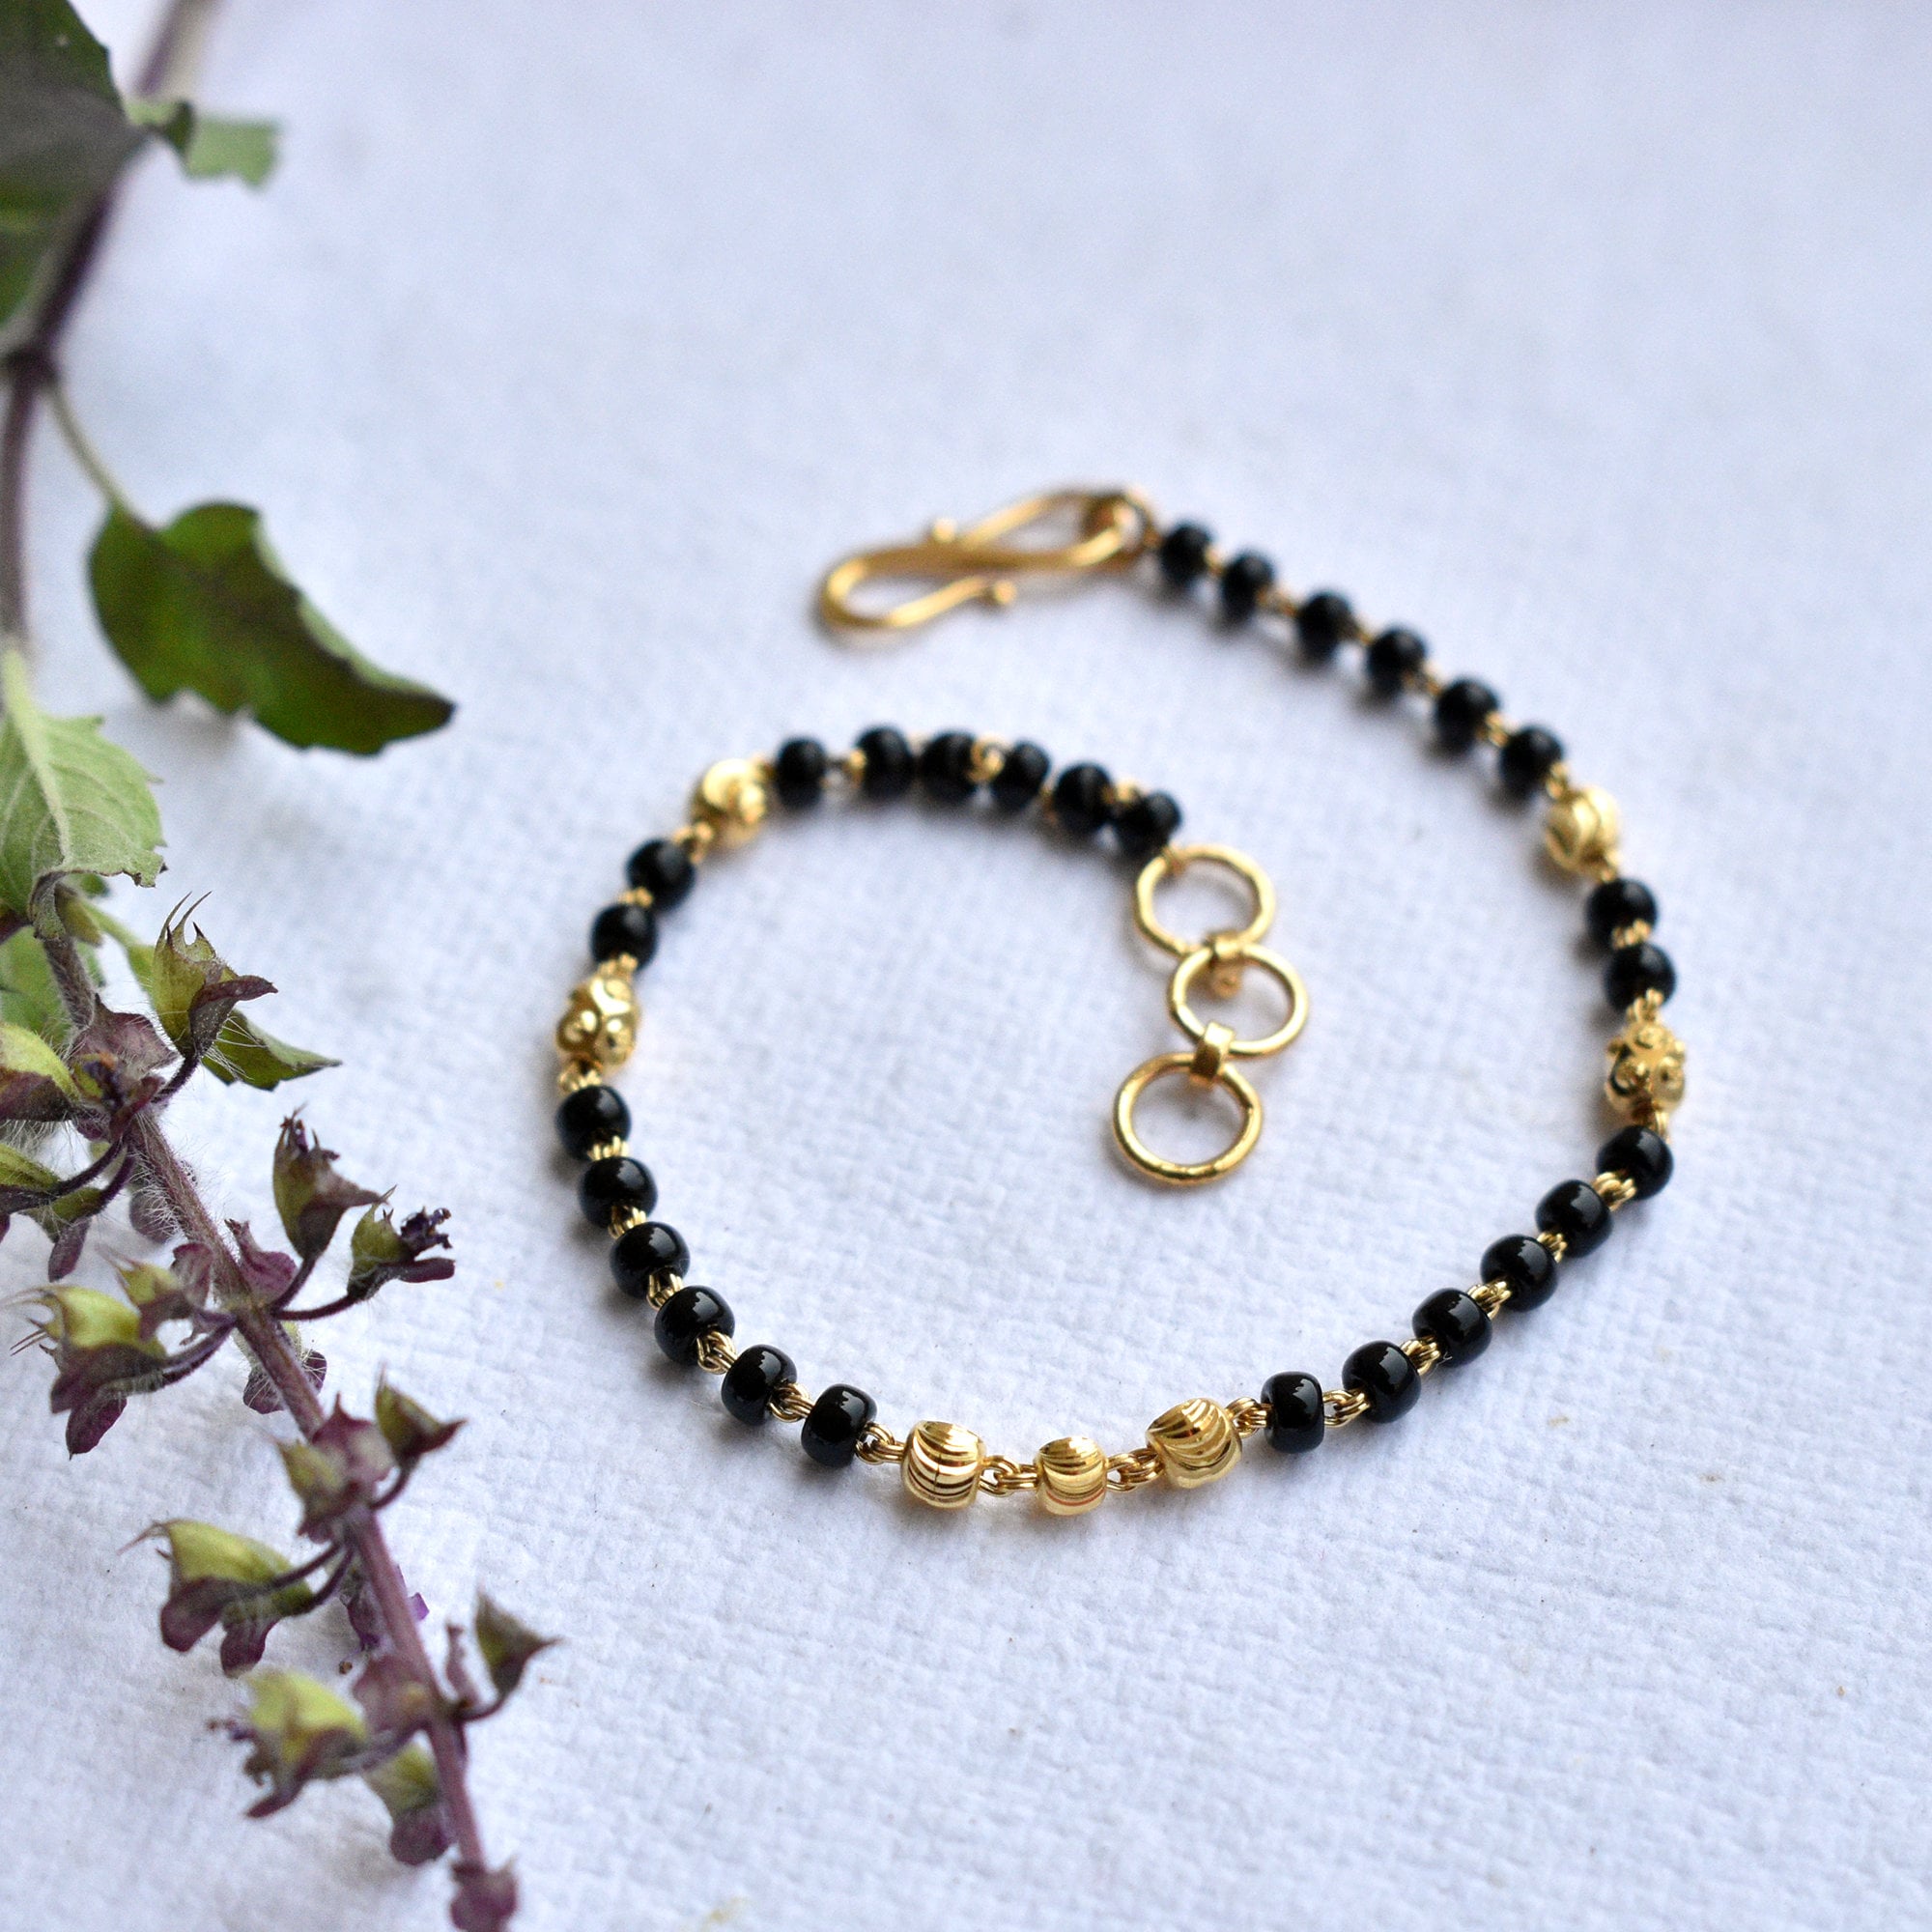 Buy Gold Design Newborn Baby Gold and Black Beads Bracelet for Baby